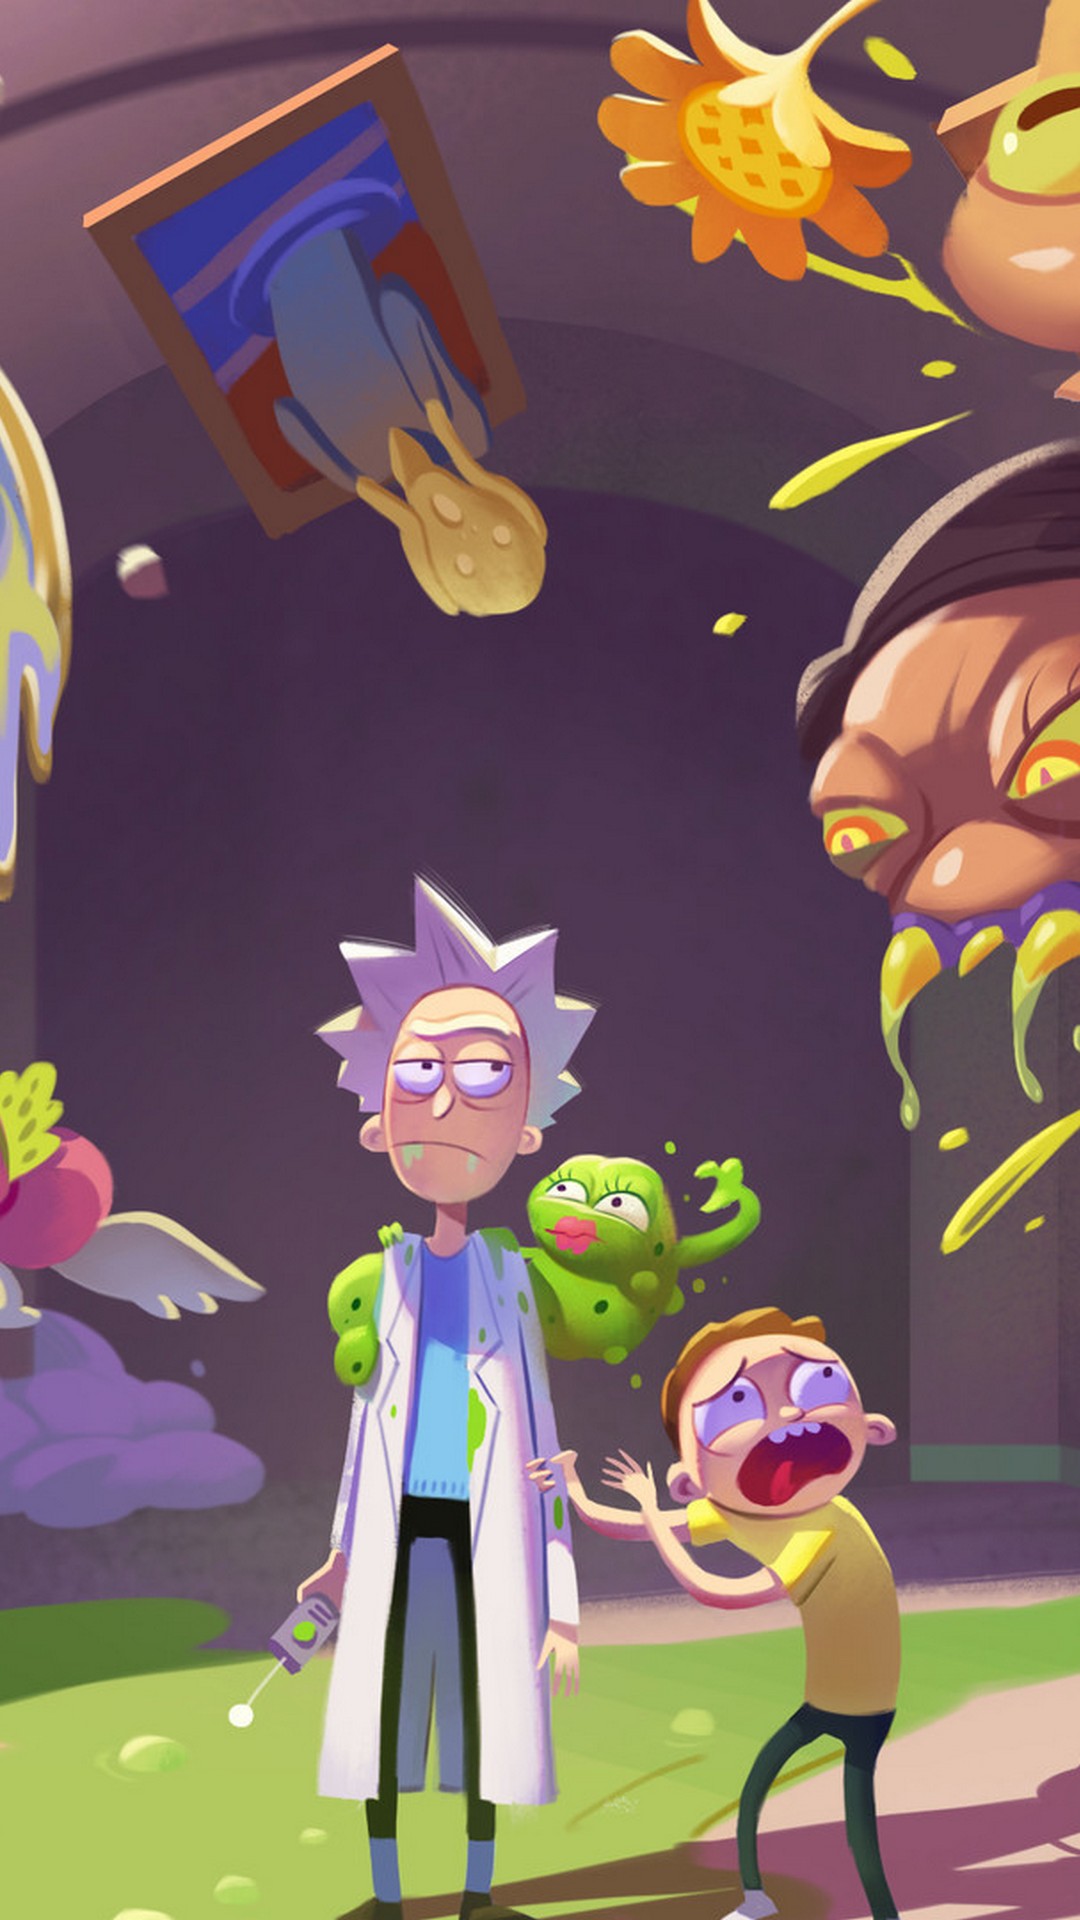 Rick And Morty IPhone 7 Wallpaper With High Resolution And Morty Wallpaper 4k Wallpaper & Background Download